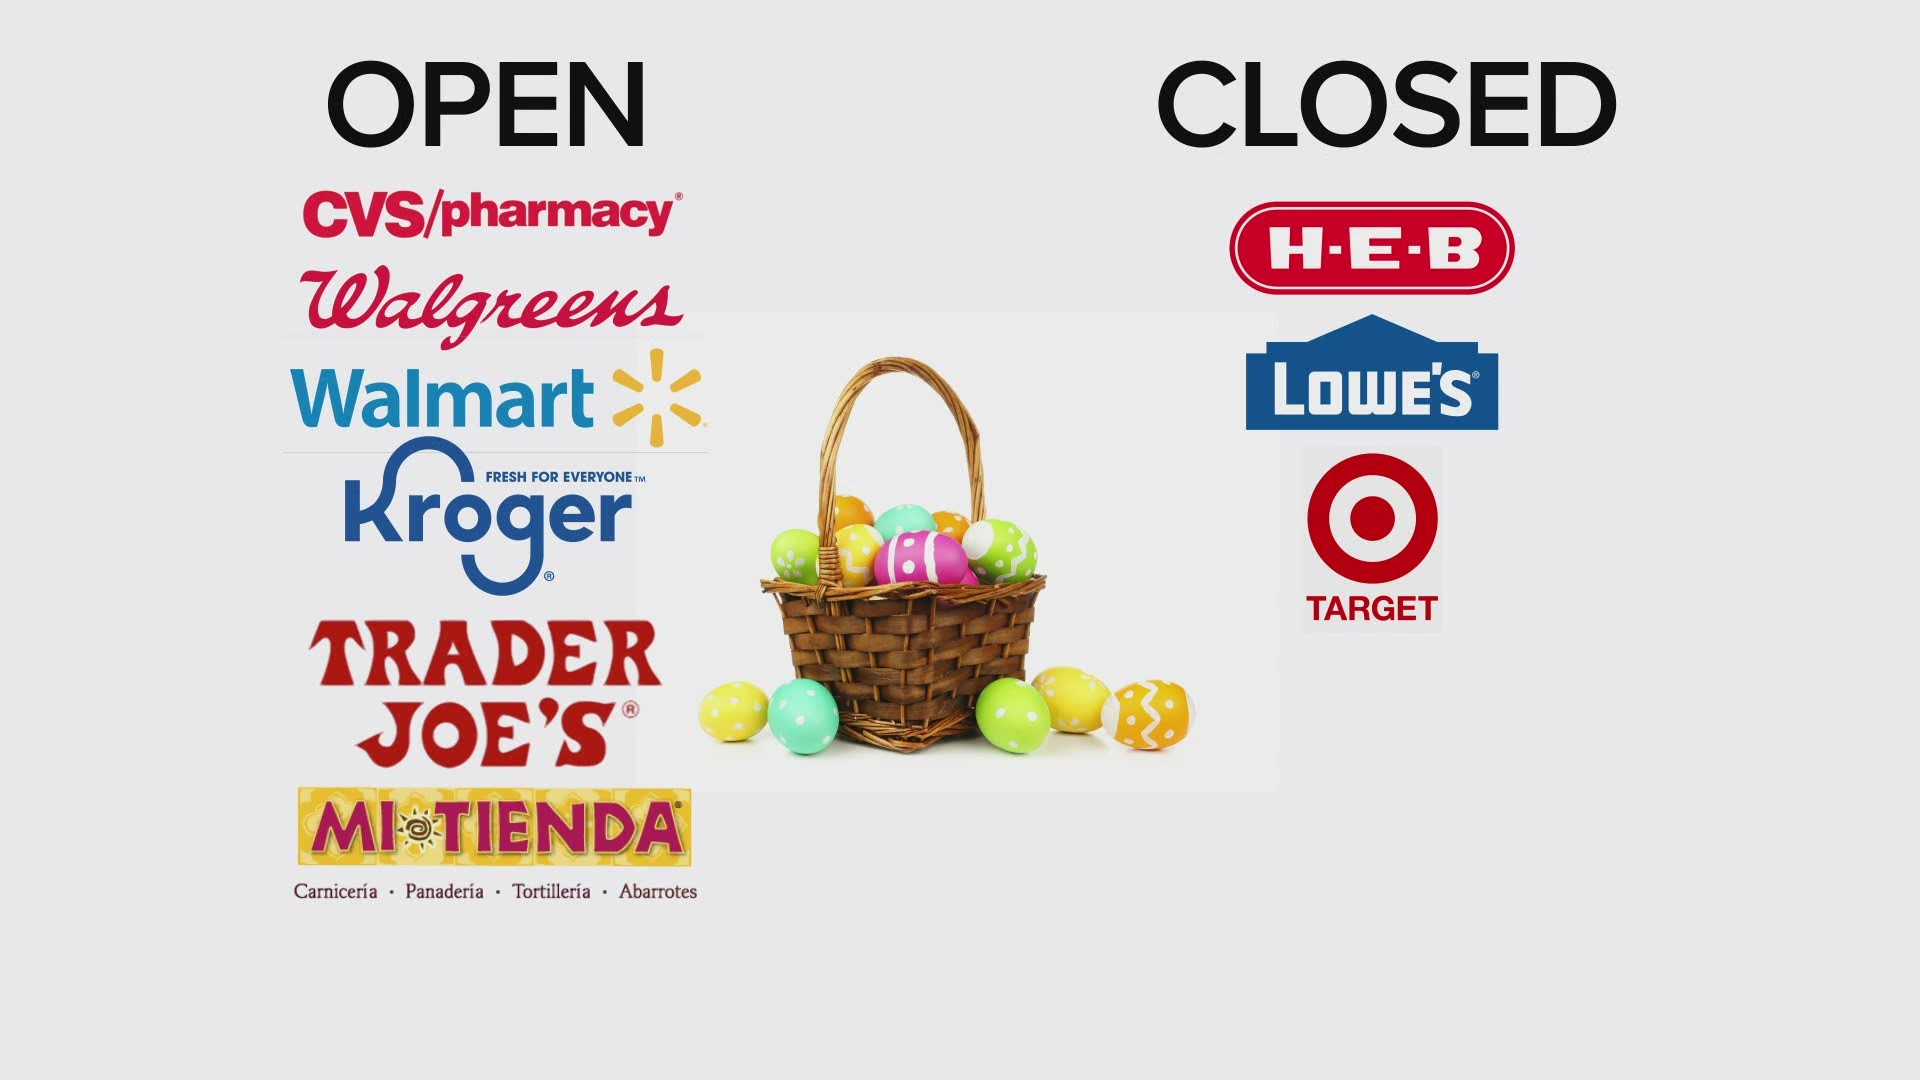 Easter Sunday has returned! Here's what stores will be open and which will be closed in observance.